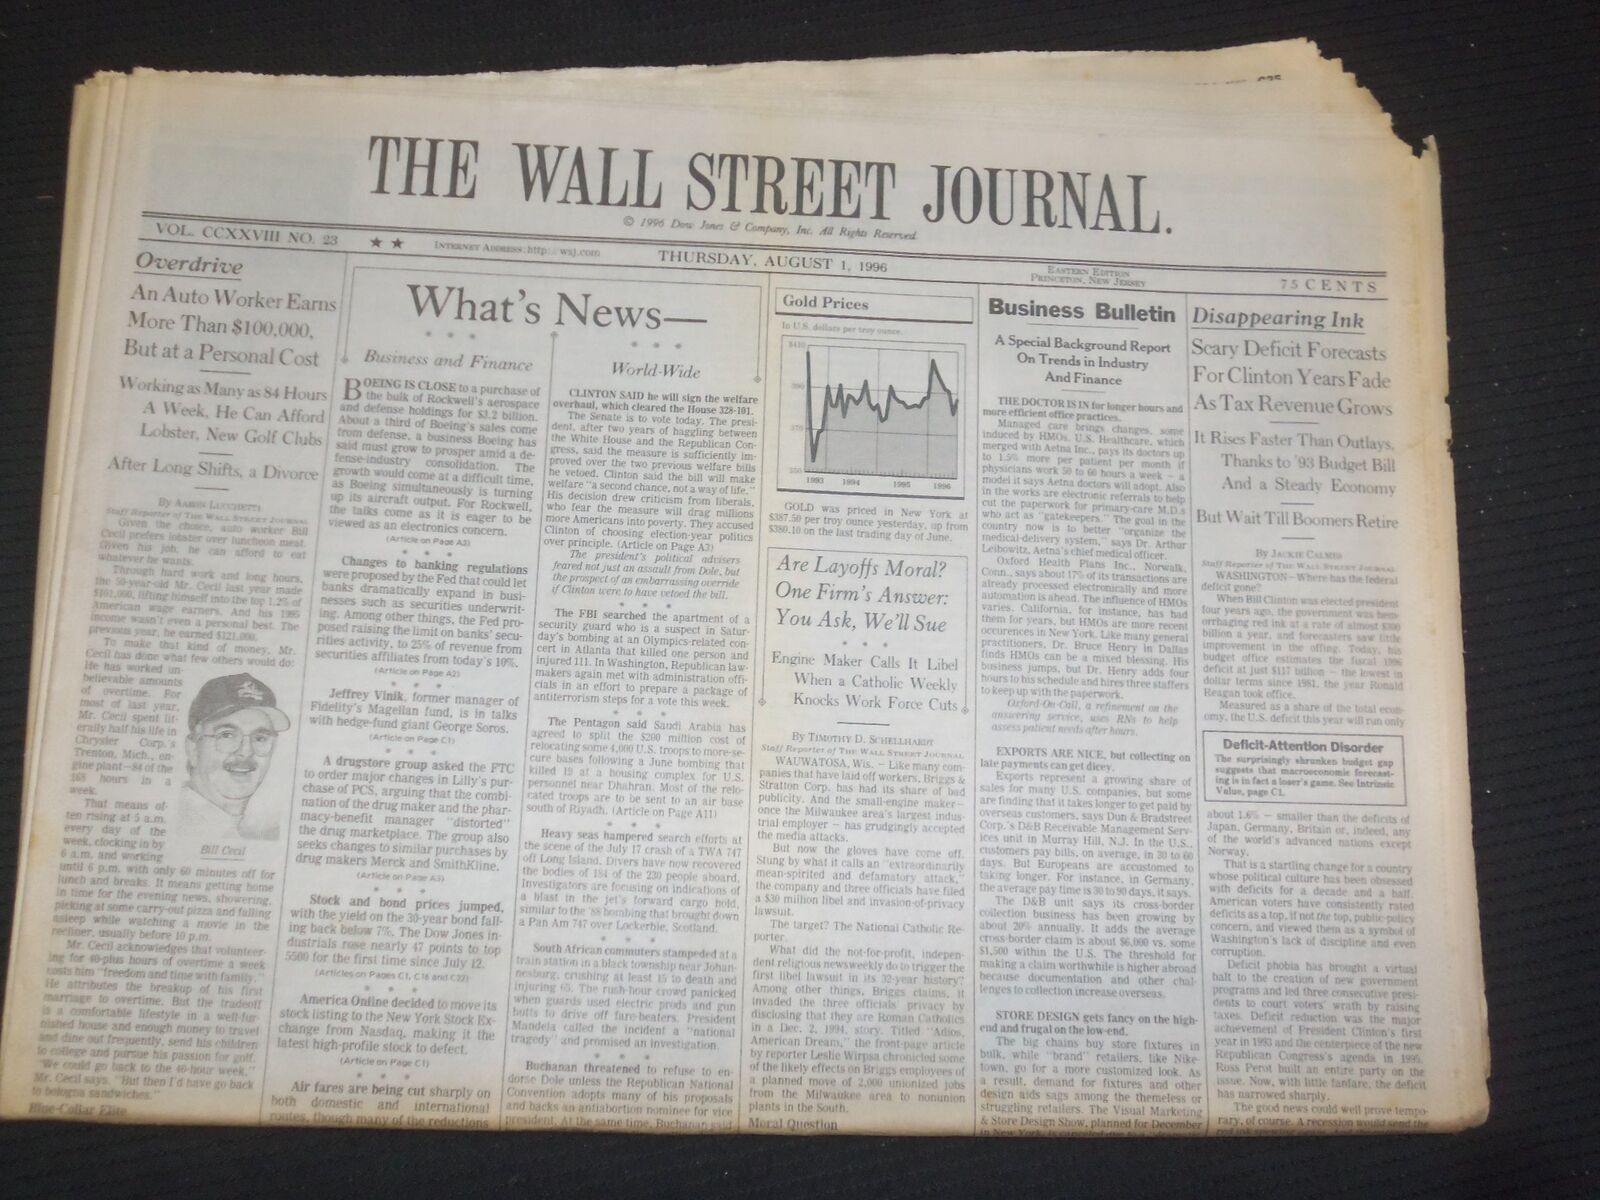 1996 AUG 1 THE WALL STREET JOURNAL -AUTO WORKER EARNS MORE THAN $100,000- WJ 270